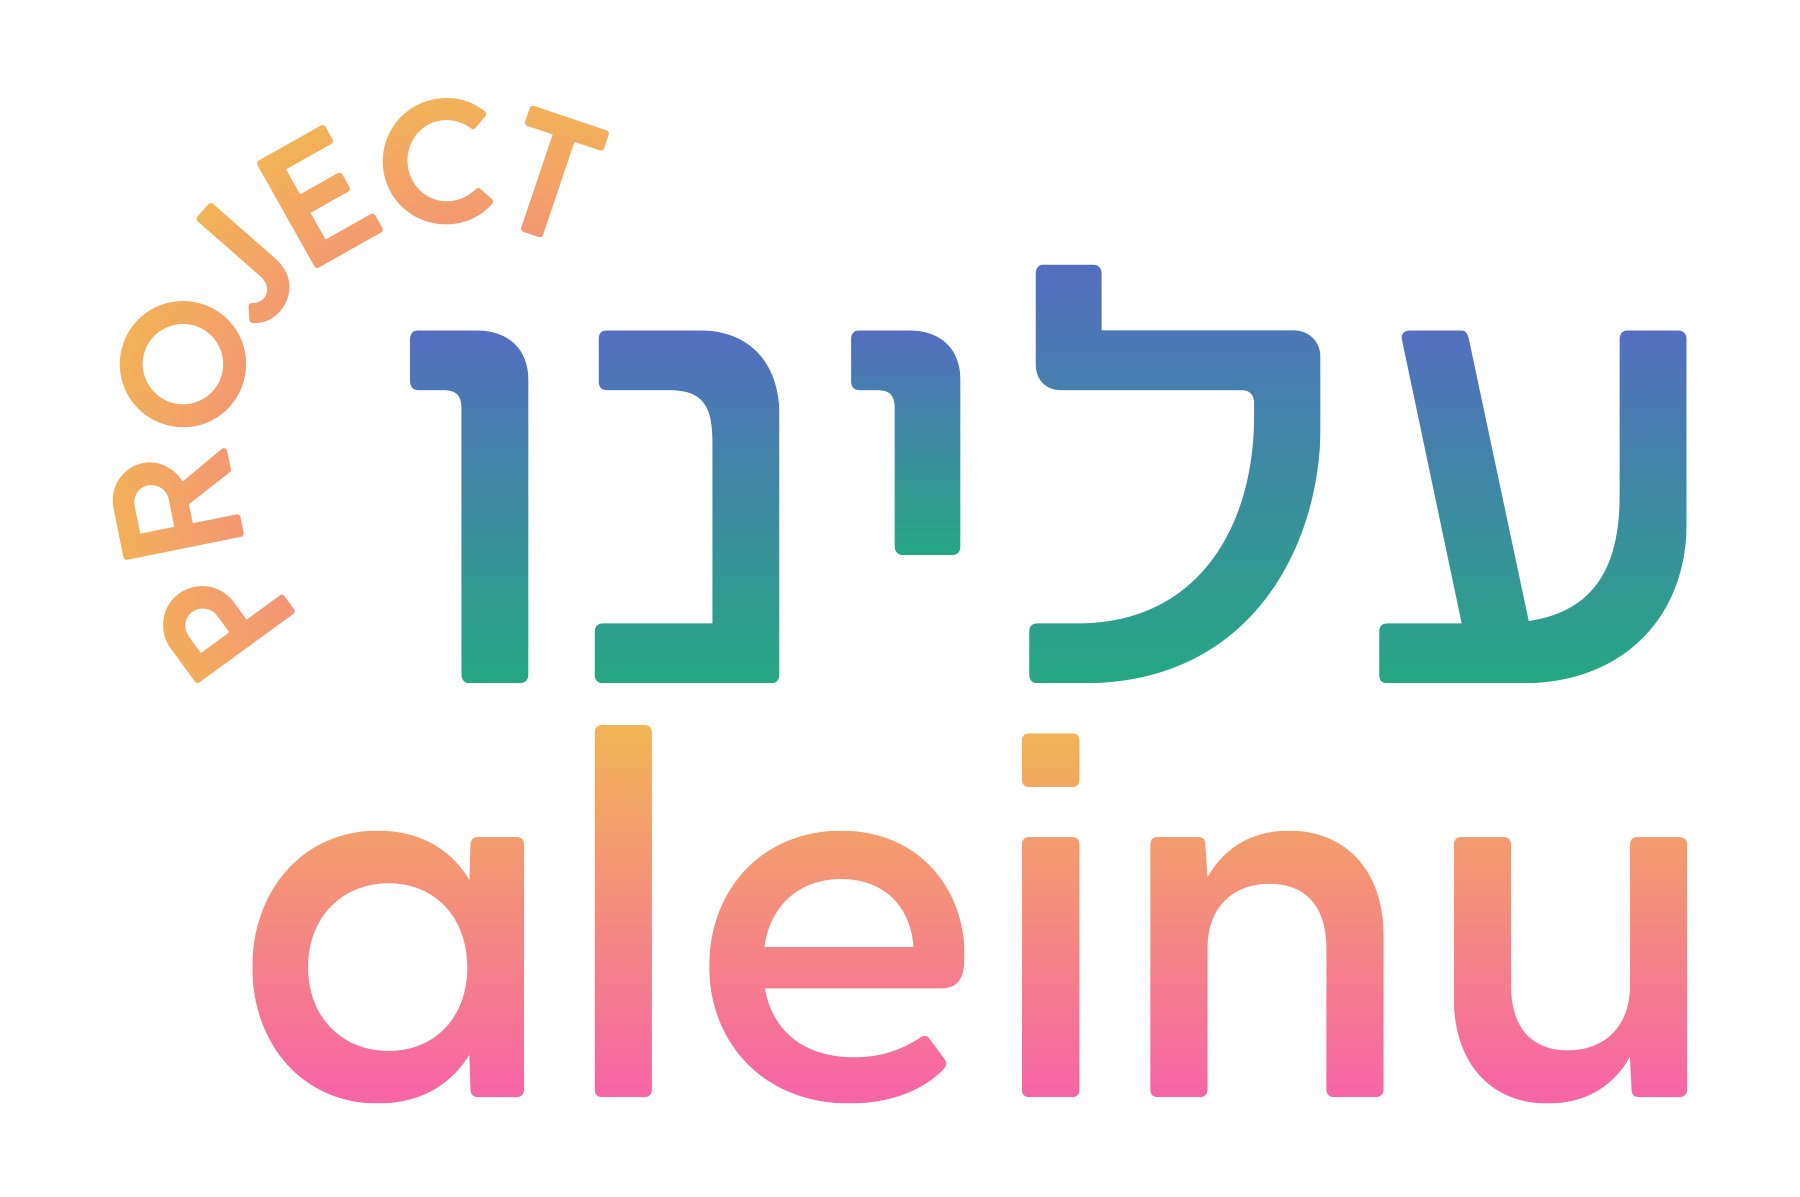 A colorful logo for the project saleinu.